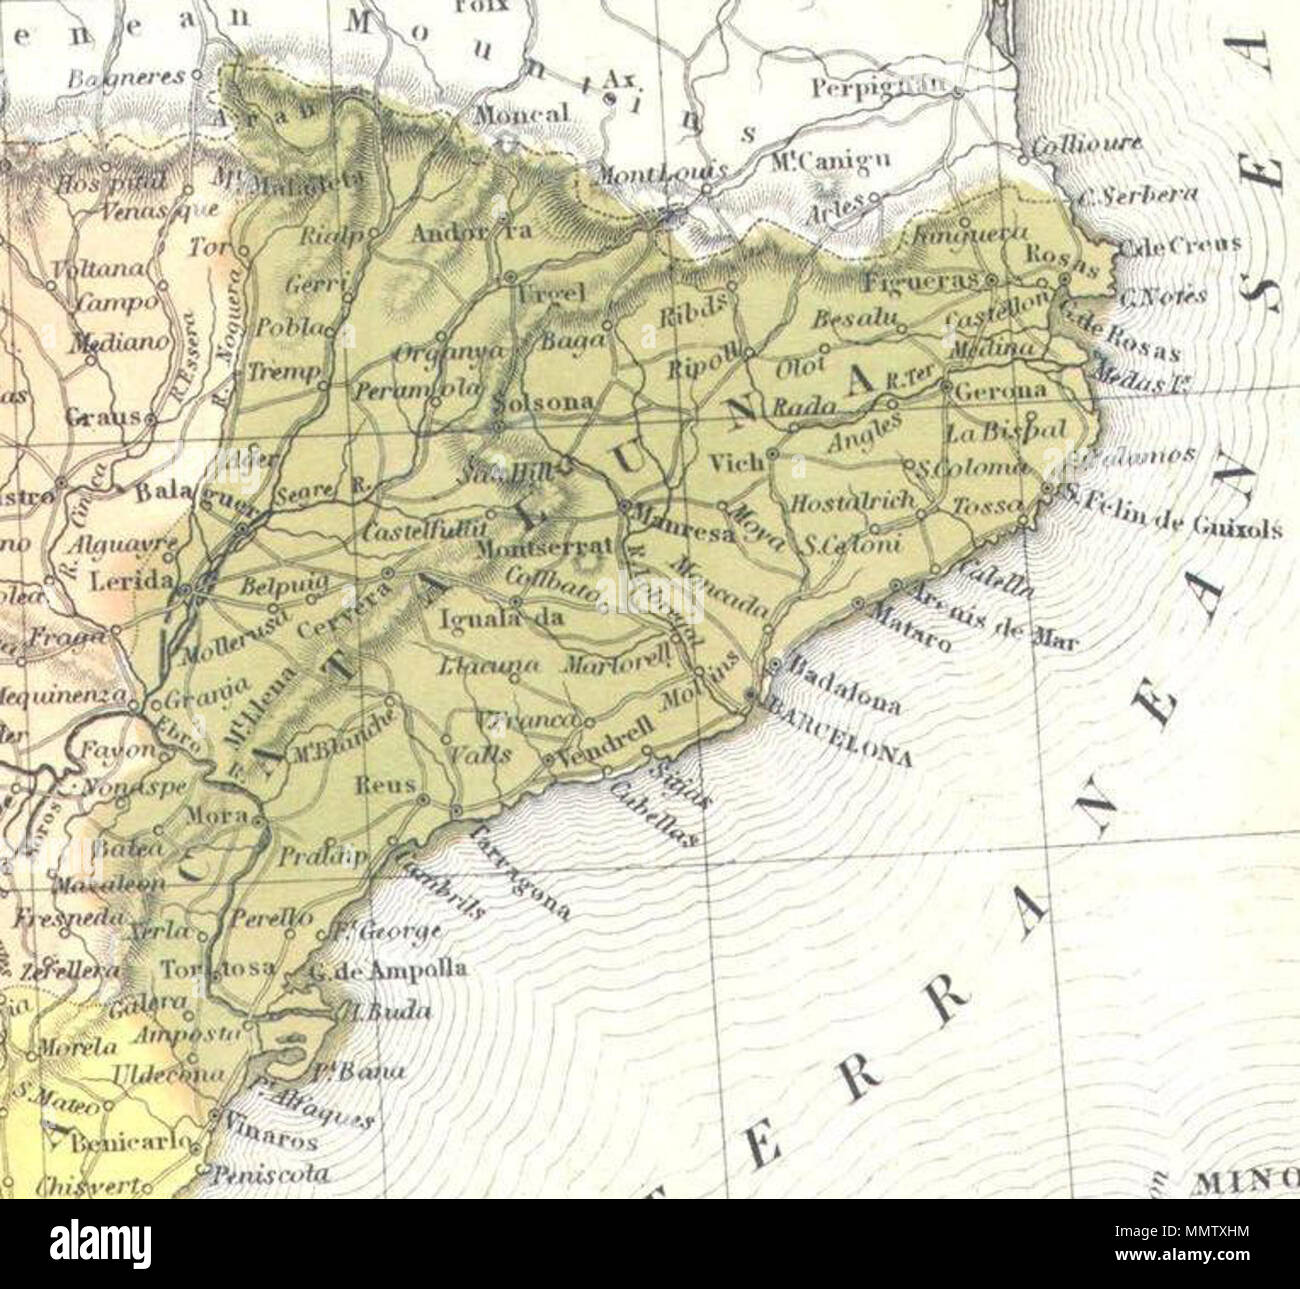 English: This hand colored map is a copper plate engraving, dating to 1850,  by the legendary American mapmaker S. A. Mitchell, the elder. It represents  Spain and Portugal. Includes the Balearic